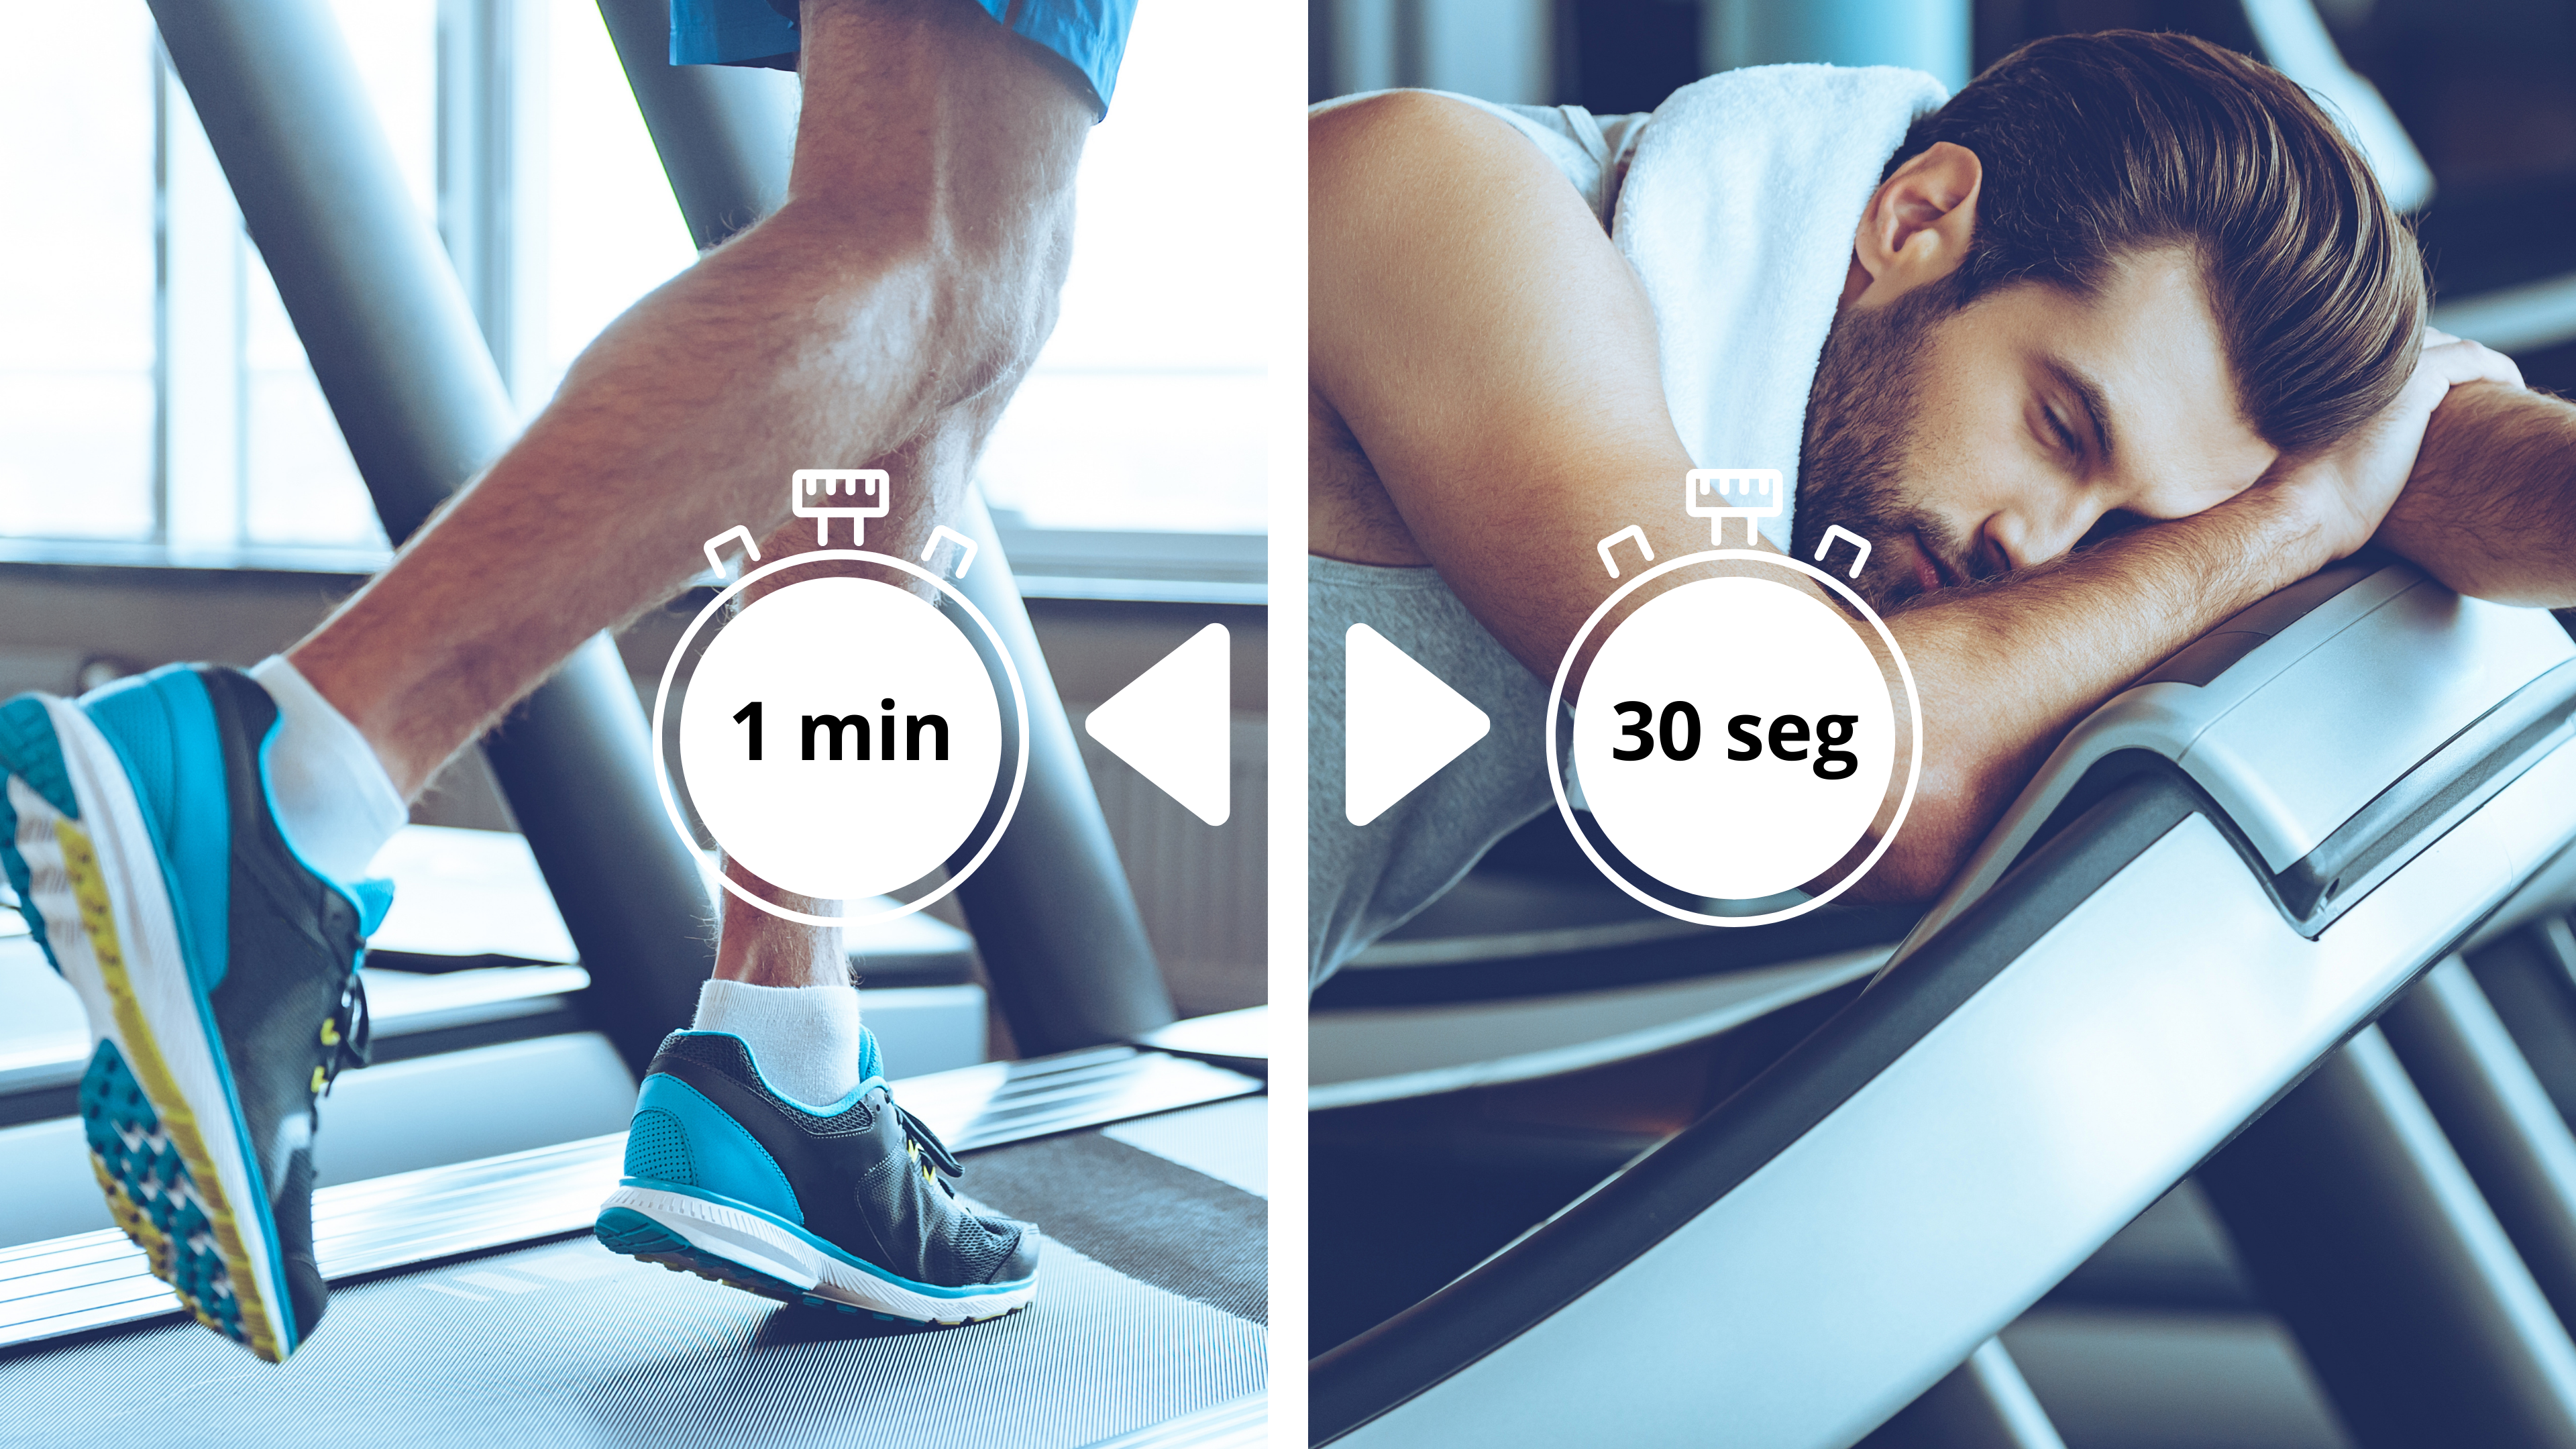 How a HIIT workout works